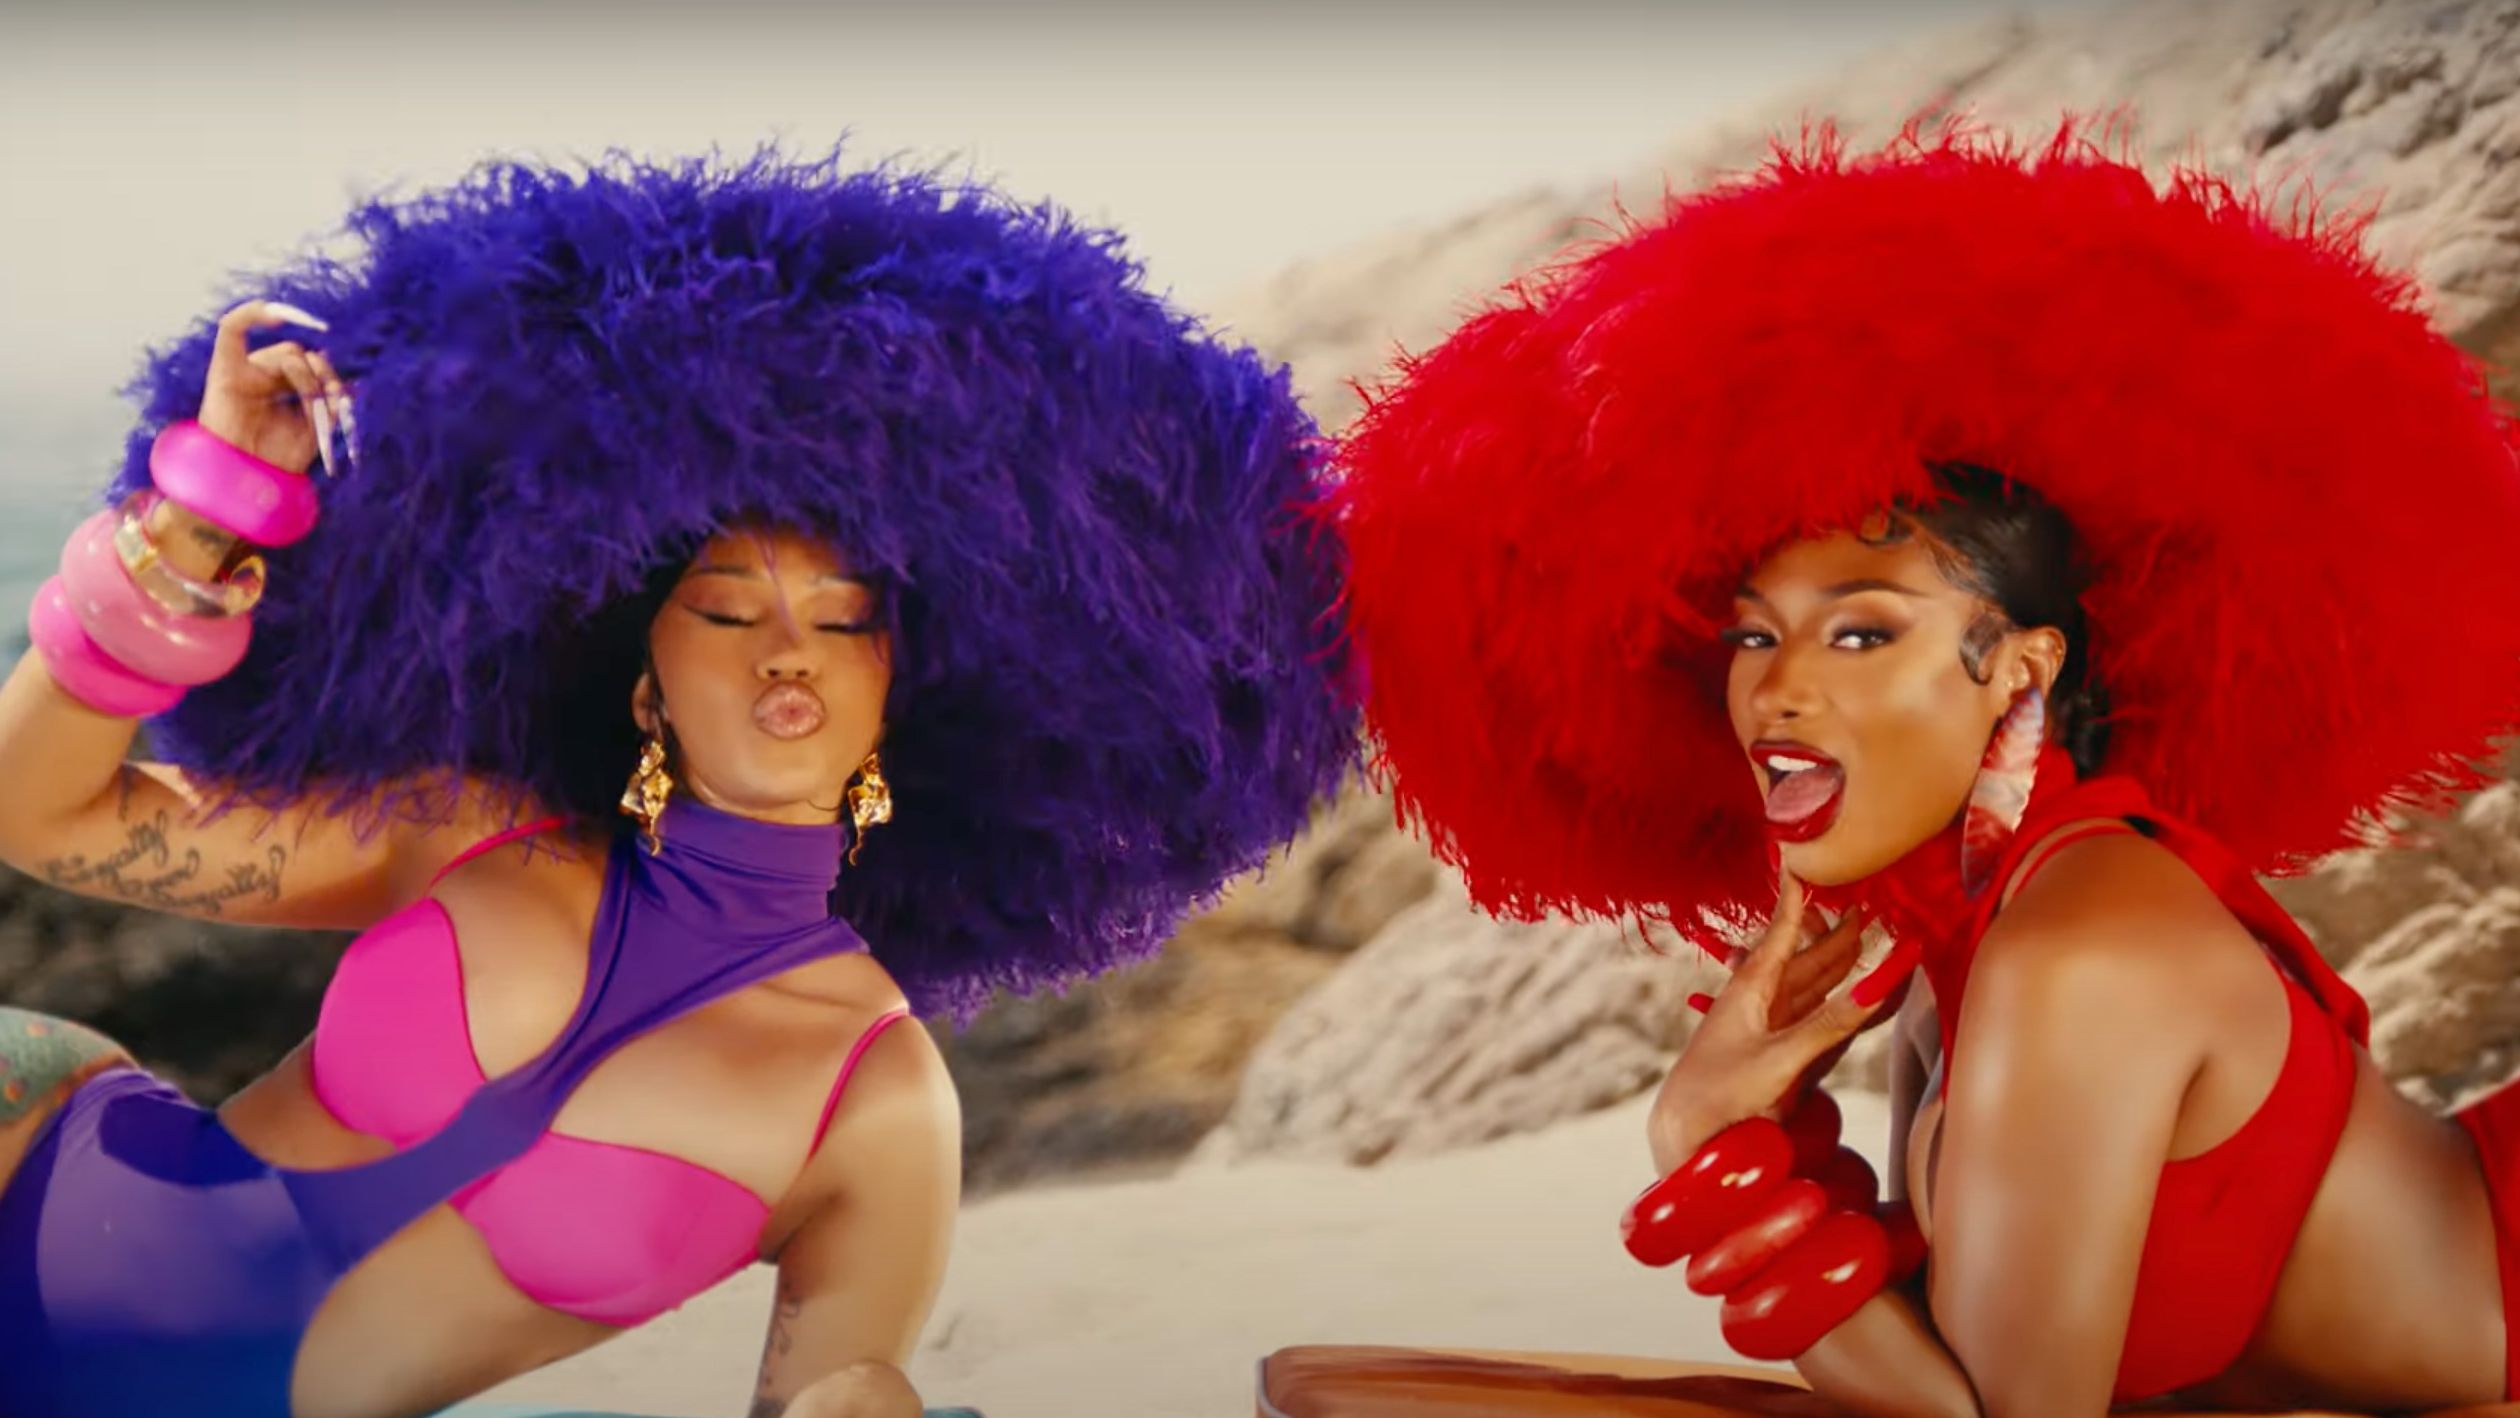 Megan Thee Stallion Teases Collab Project with Cardi B, Says They’re Building an EP